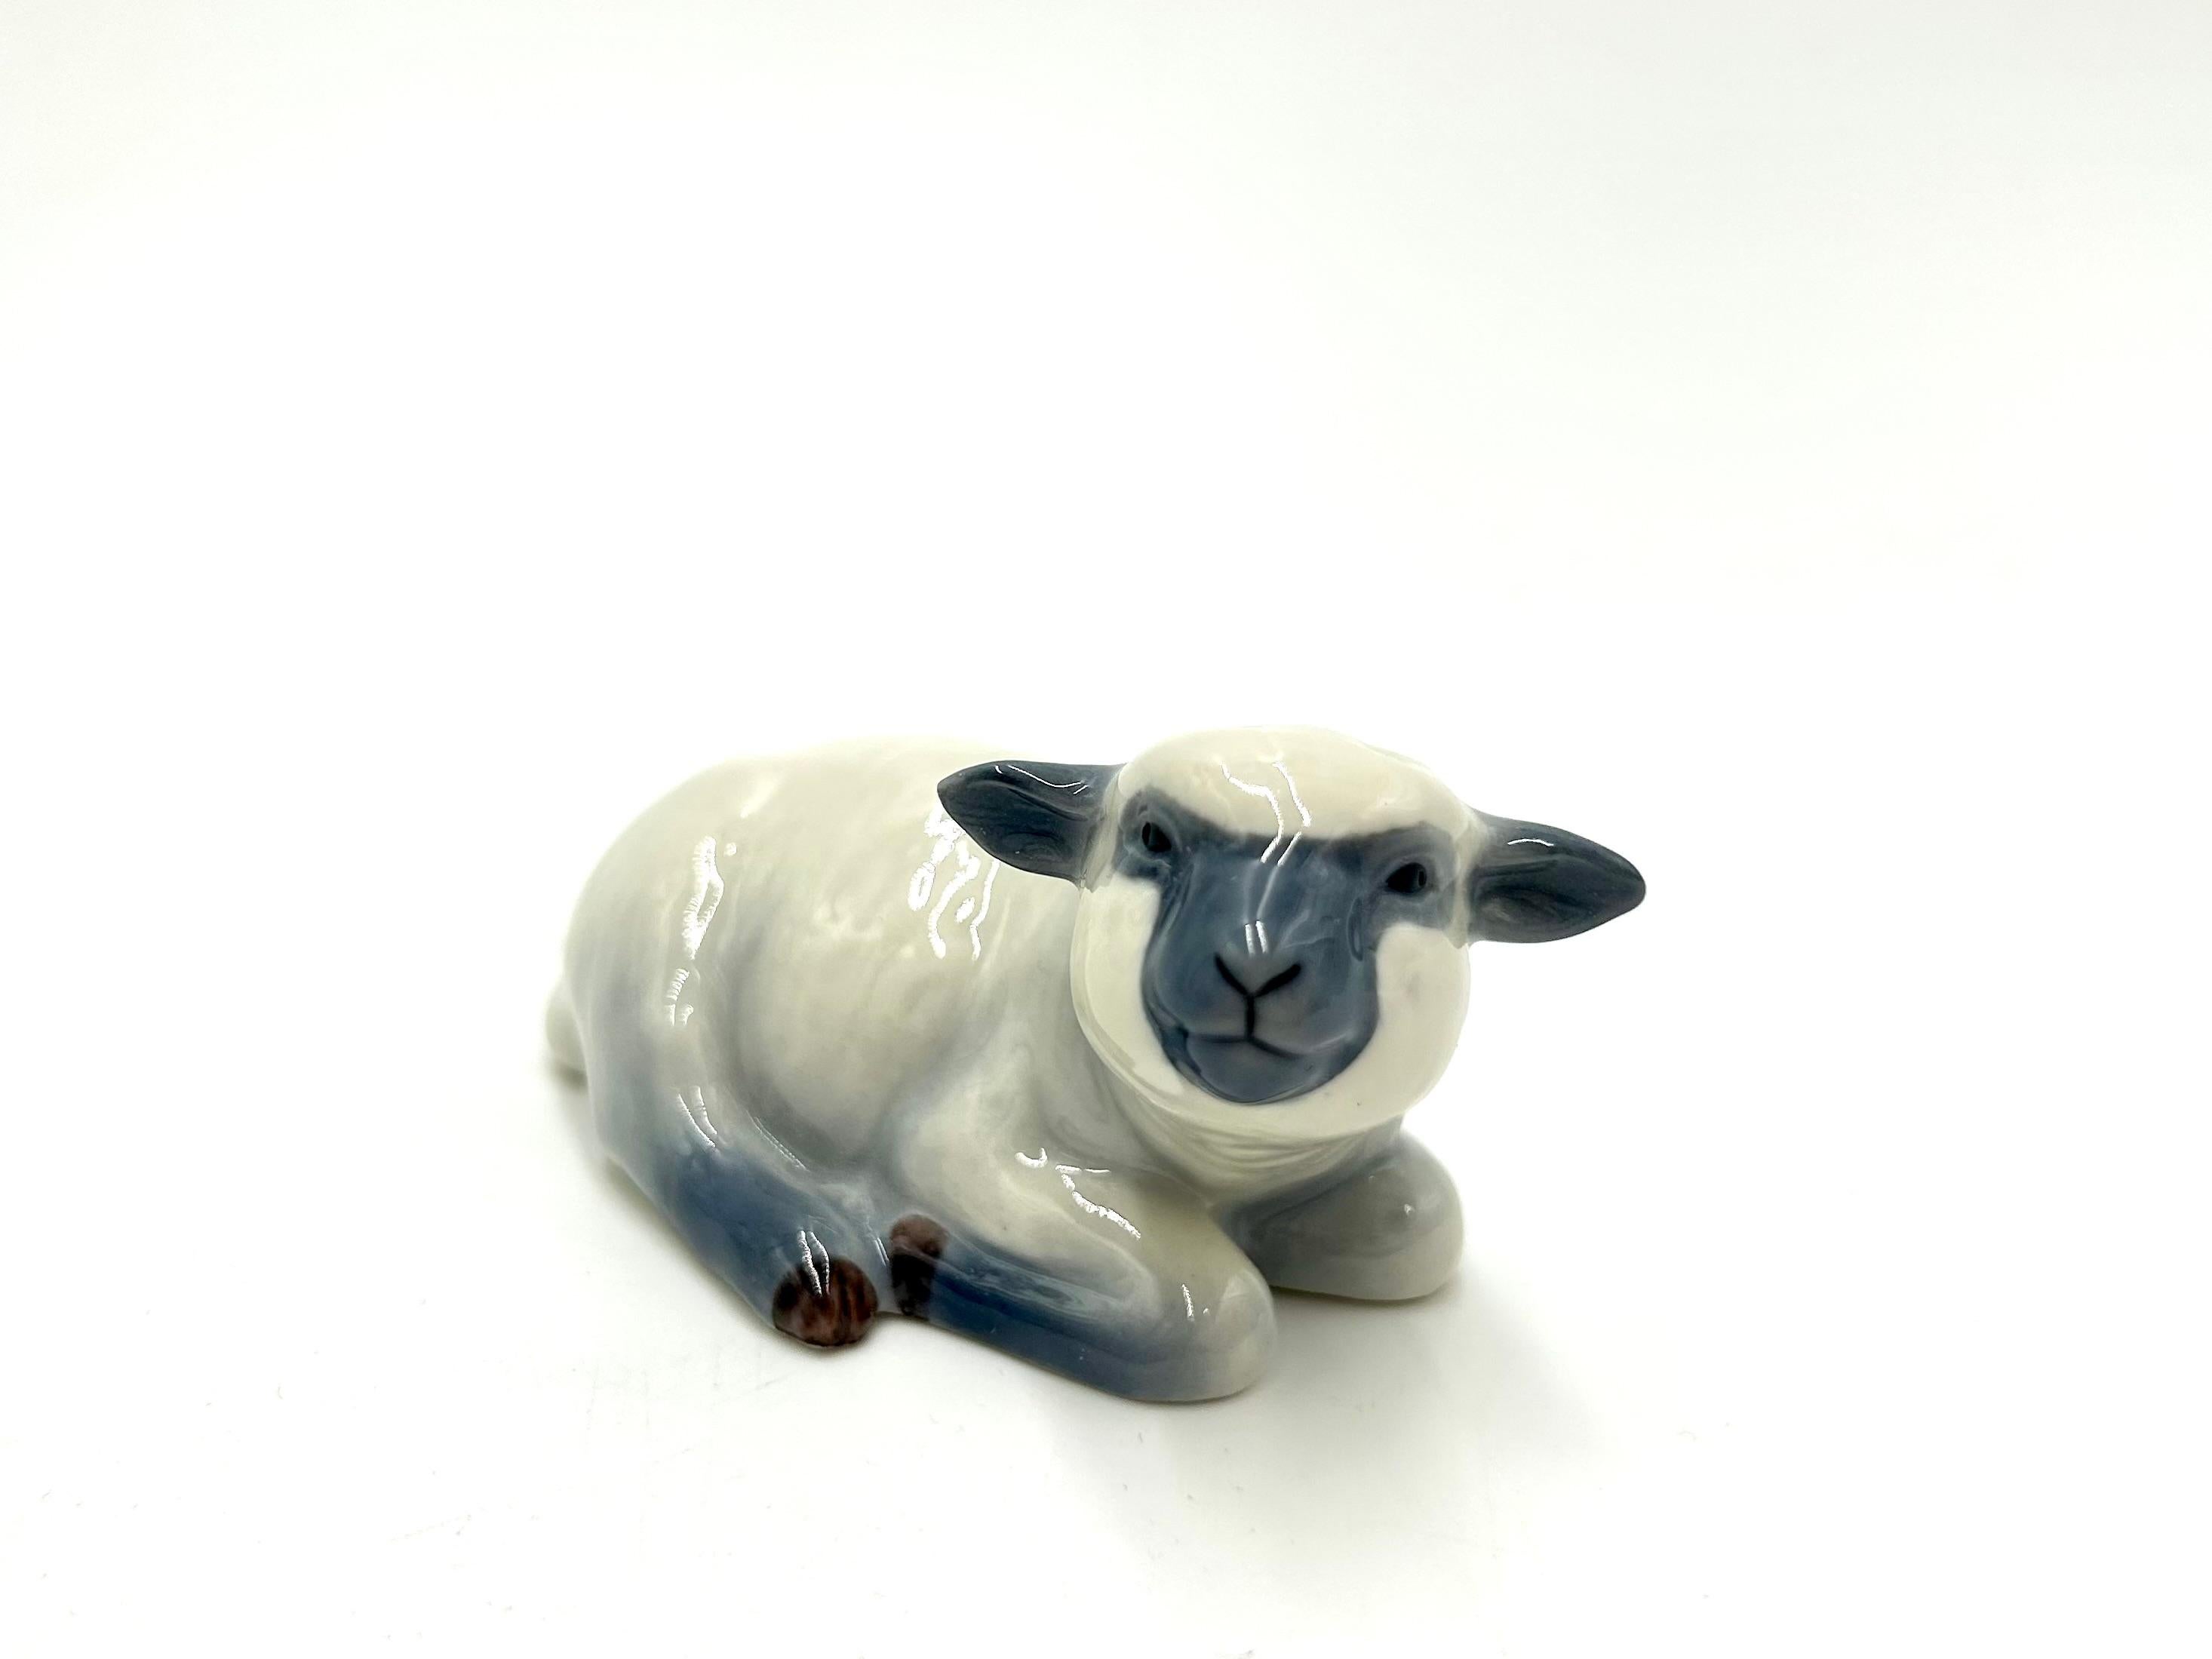 Porcelain sheep figurine

Produced by the Danish manufacture Royal Copenhagen

Contemporary production

Very good condition without damage

Measures: height: 4cm

width: 7cm

depth: 4cm.